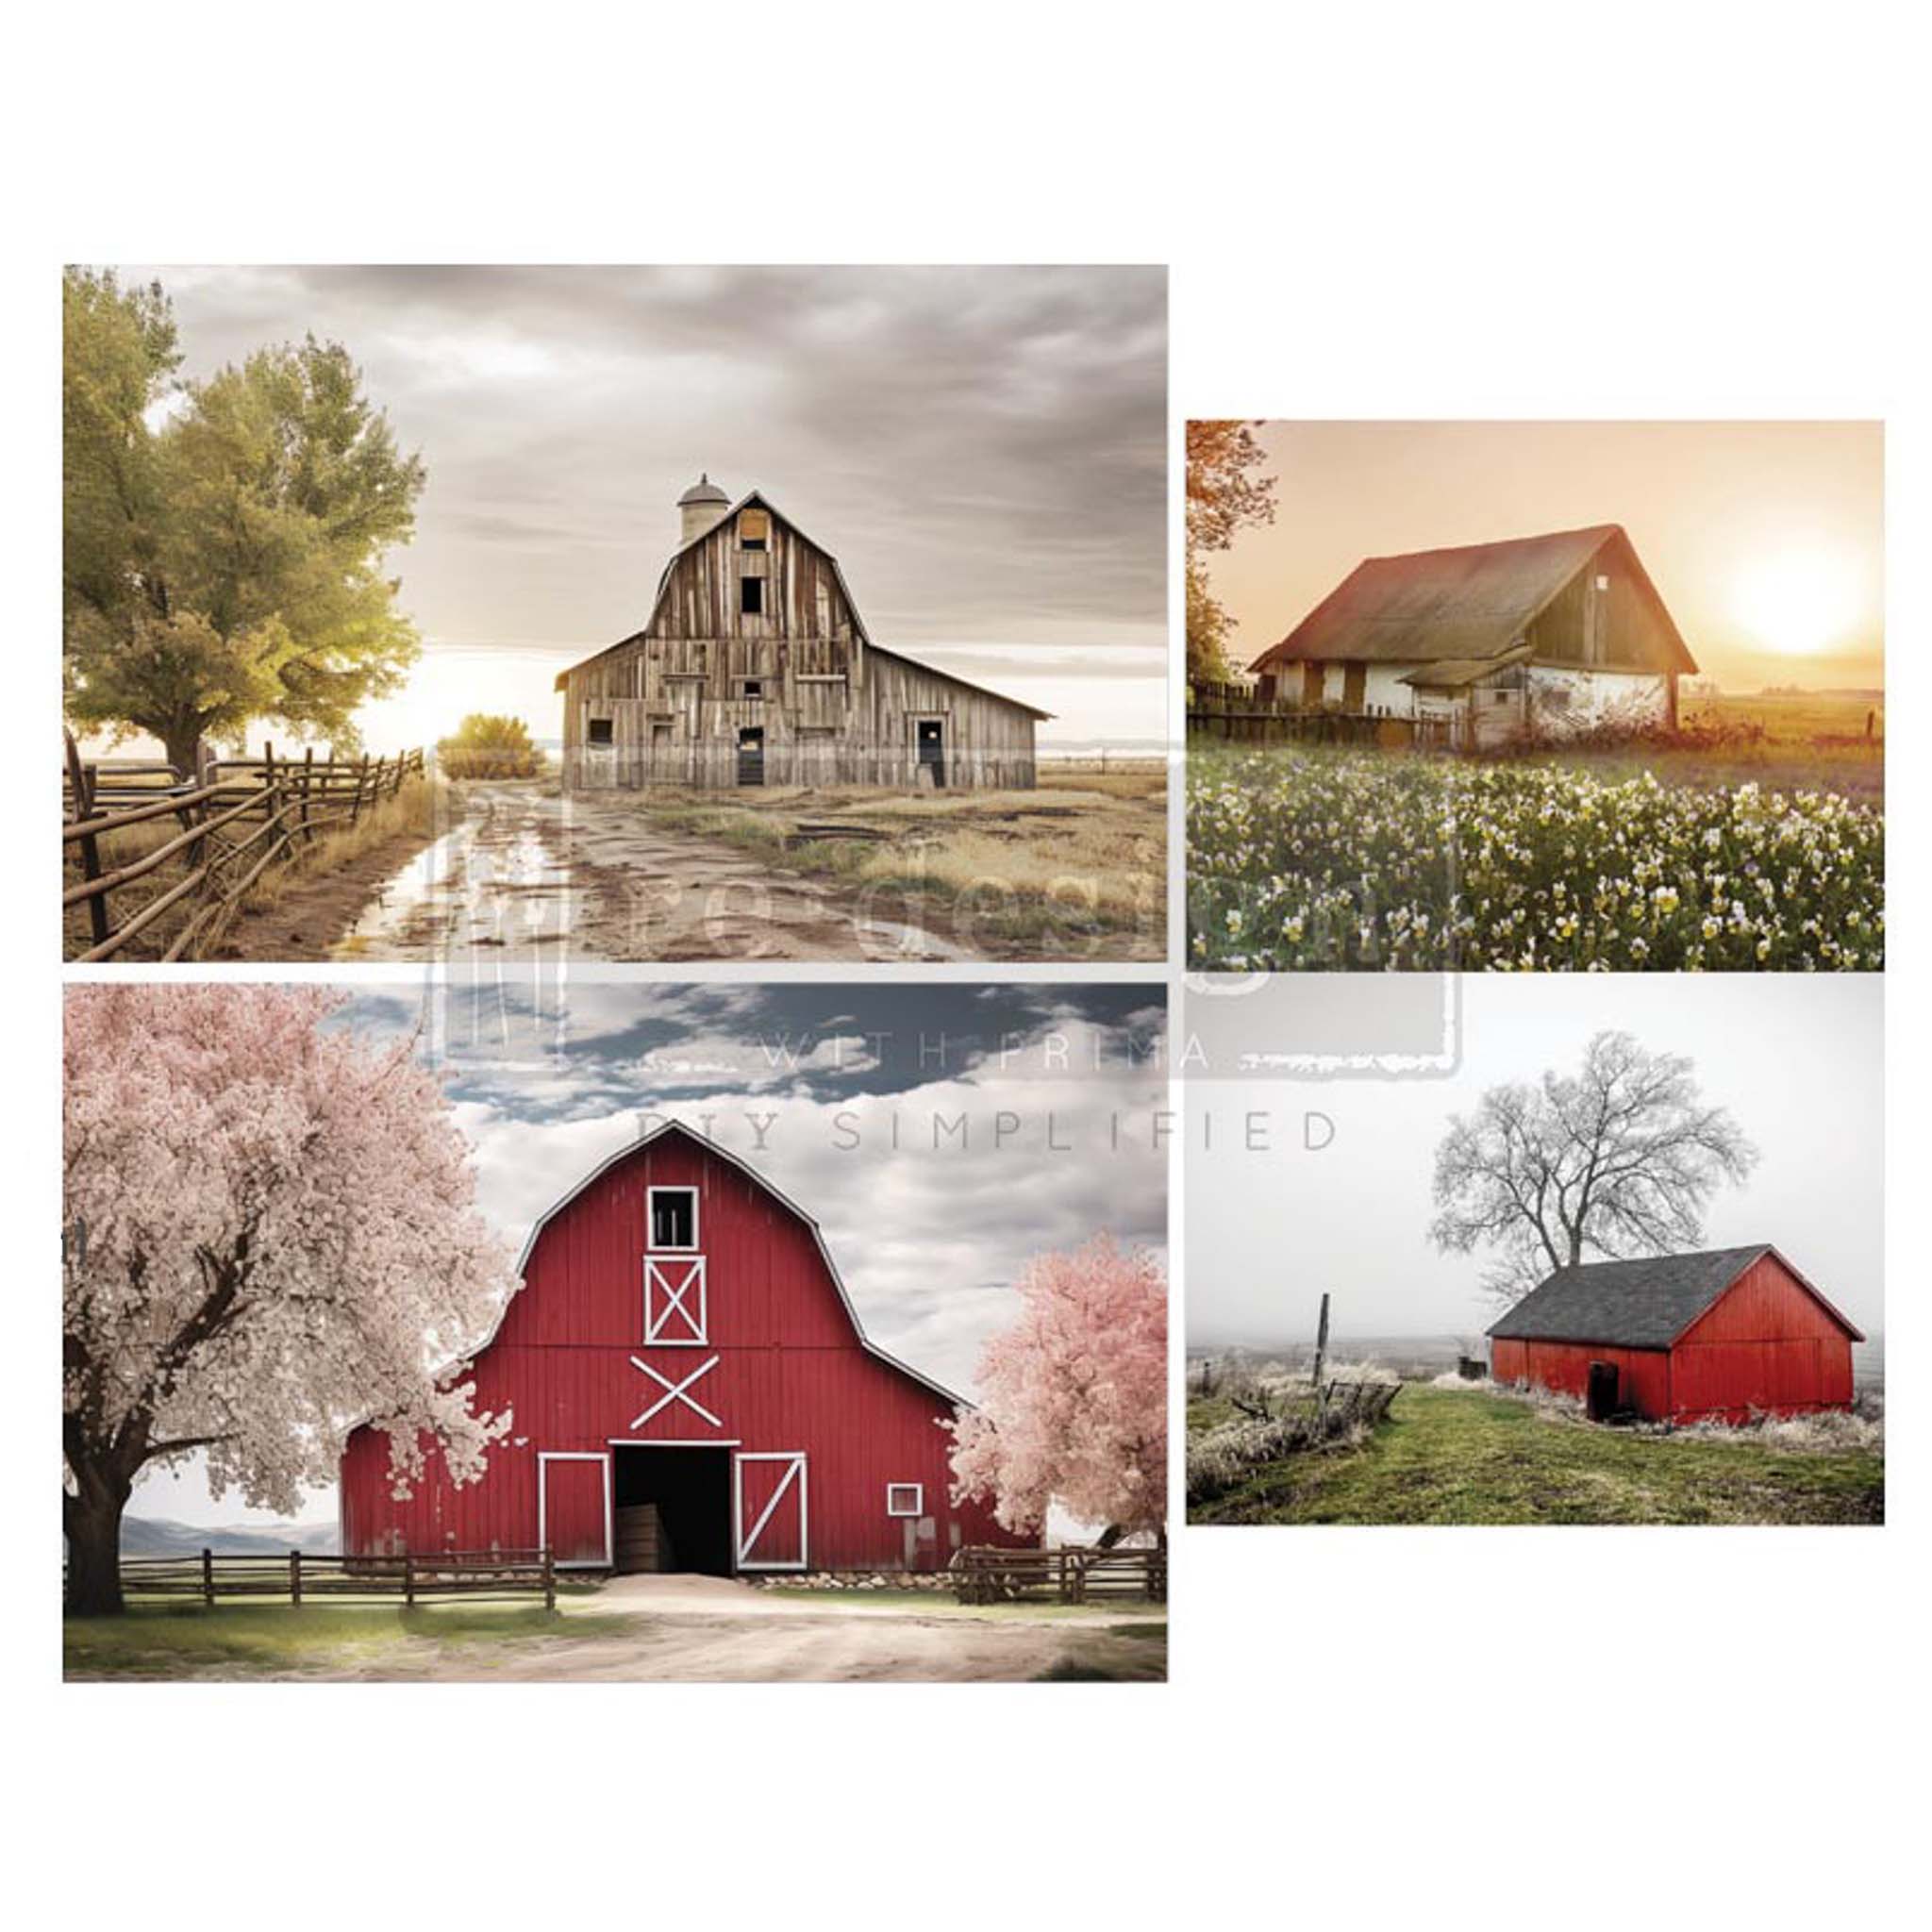 Three sheets of ReDesign with Prima's Haystack Hues tissue paper feature enchanting scenes with old barns on farms are against a white background.